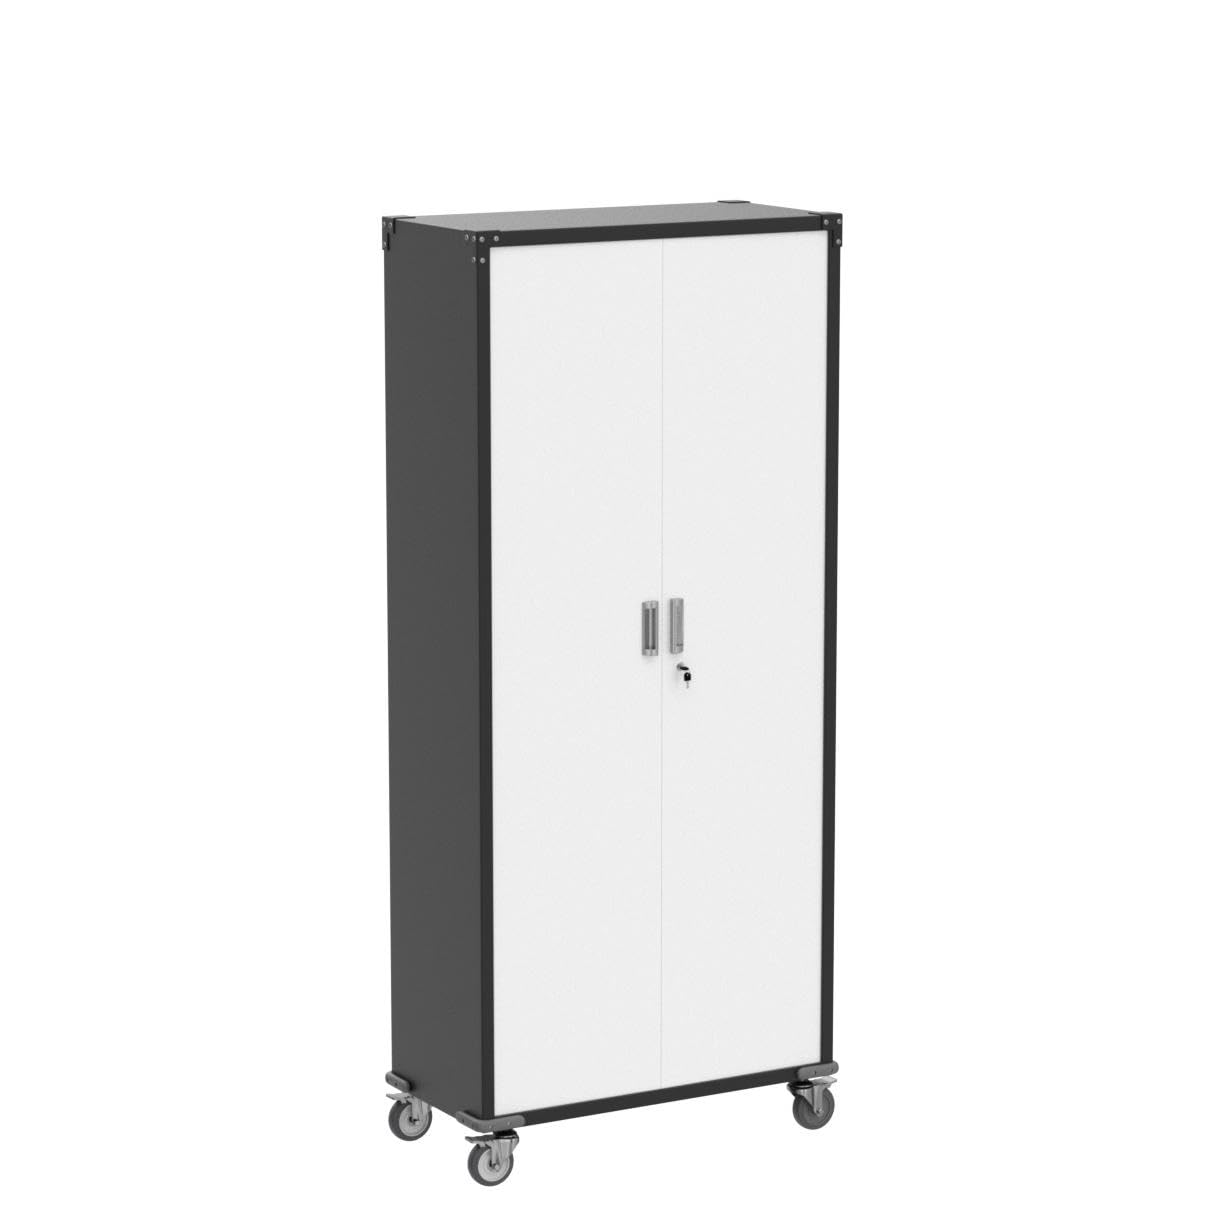 VINGLI 72'' Tall Garage Storage Cabinet, Metal Storage Cabinet with Wheels, Locking Doors and Adjustable Shelves (Black & Silver, 32''W x 16''D x